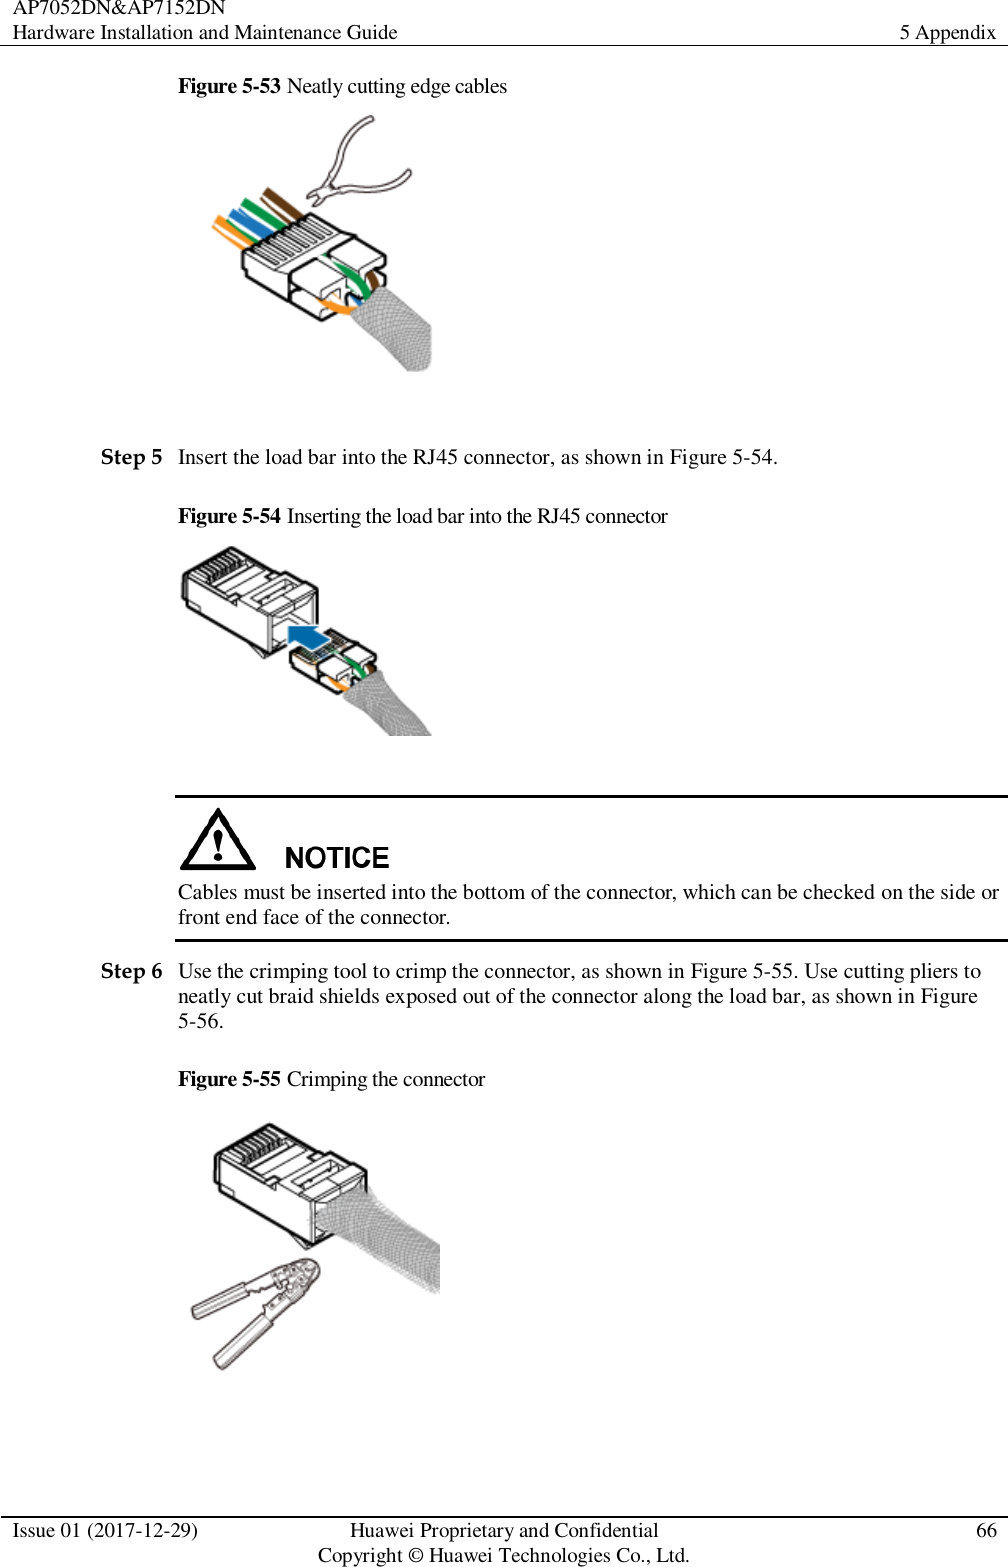 AP7052DN&amp;AP7152DN Hardware Installation and Maintenance Guide 5 Appendix  Issue 01 (2017-12-29) Huawei Proprietary and Confidential                                     Copyright © Huawei Technologies Co., Ltd. 66  Figure 5-53 Neatly cutting edge cables   Step 5 Insert the load bar into the RJ45 connector, as shown in Figure 5-54. Figure 5-54 Inserting the load bar into the RJ45 connector    Cables must be inserted into the bottom of the connector, which can be checked on the side or front end face of the connector.   Step 6 Use the crimping tool to crimp the connector, as shown in Figure 5-55. Use cutting pliers to neatly cut braid shields exposed out of the connector along the load bar, as shown in Figure 5-56. Figure 5-55 Crimping the connector   